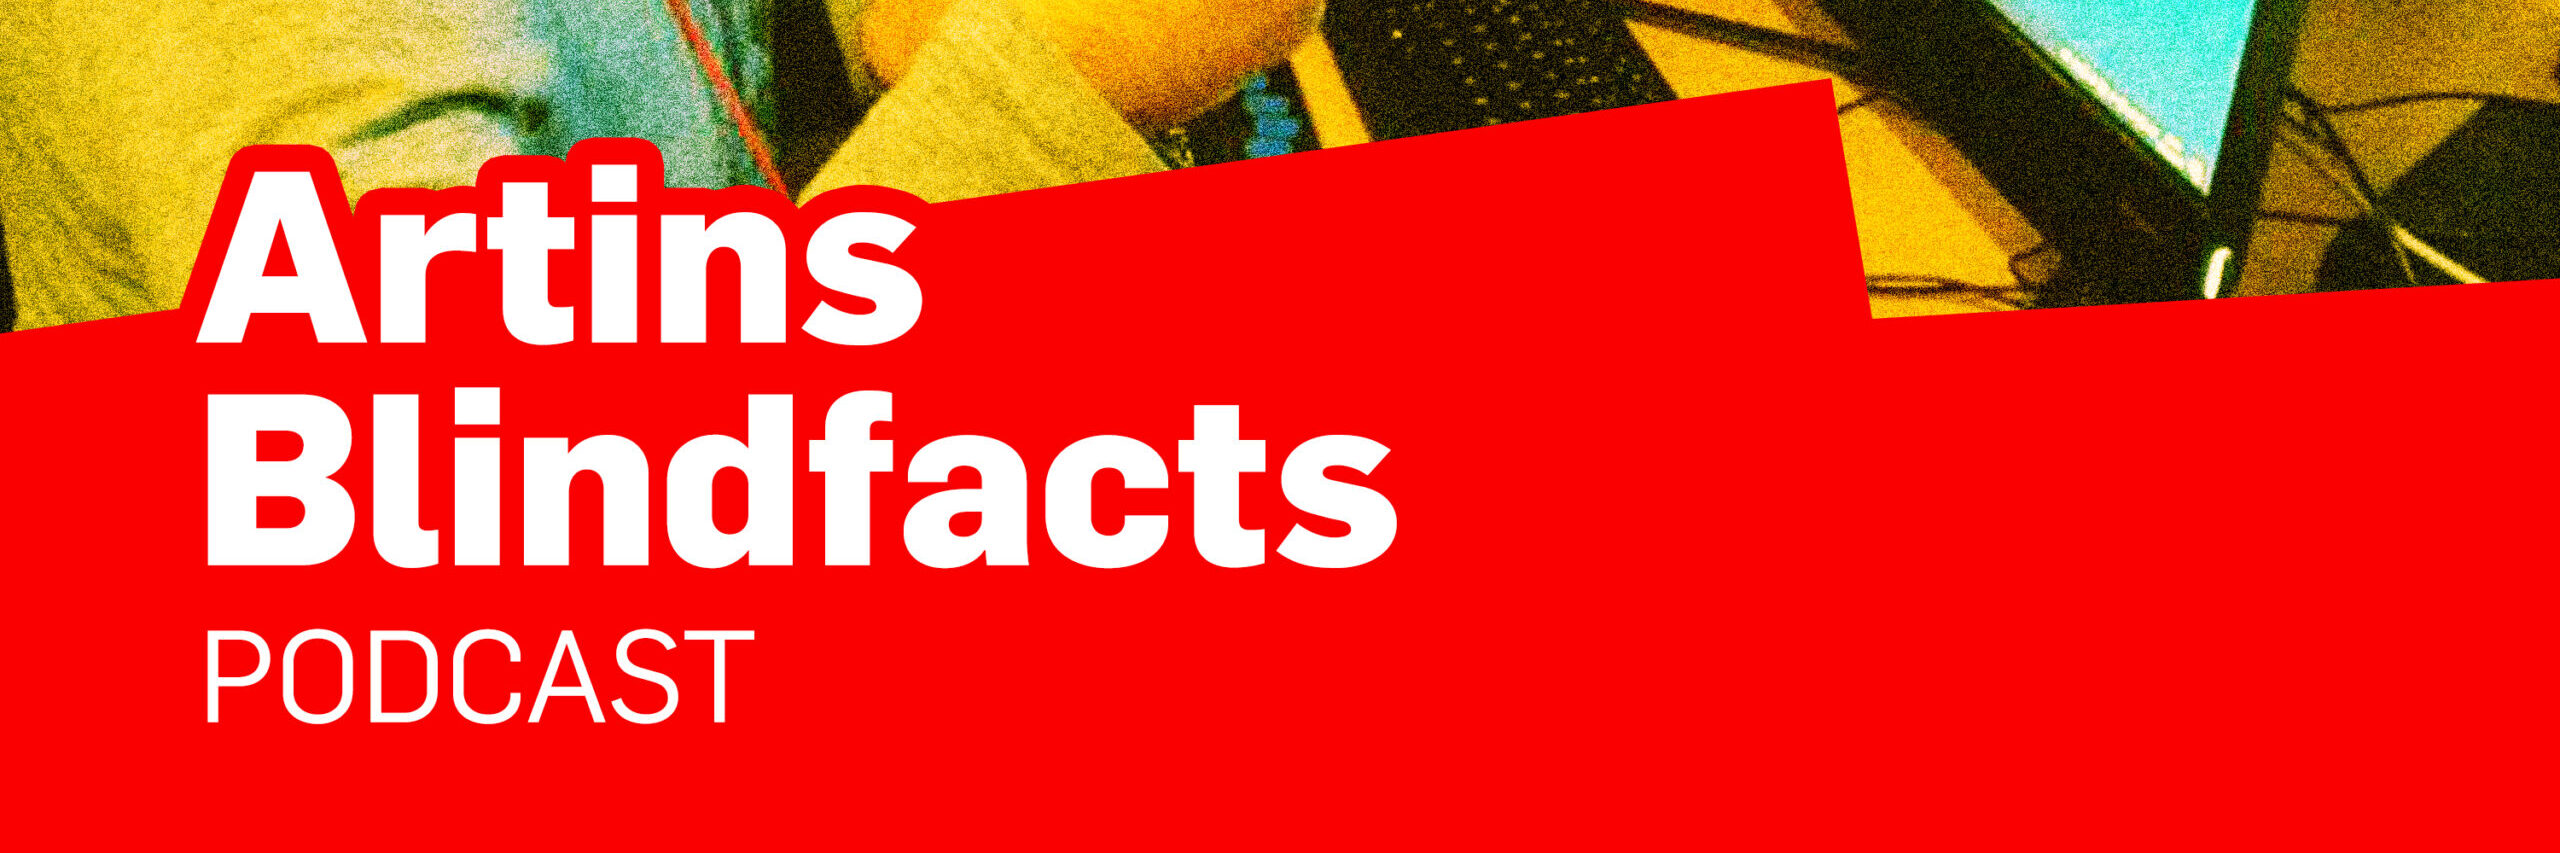 Artins Blind Facts